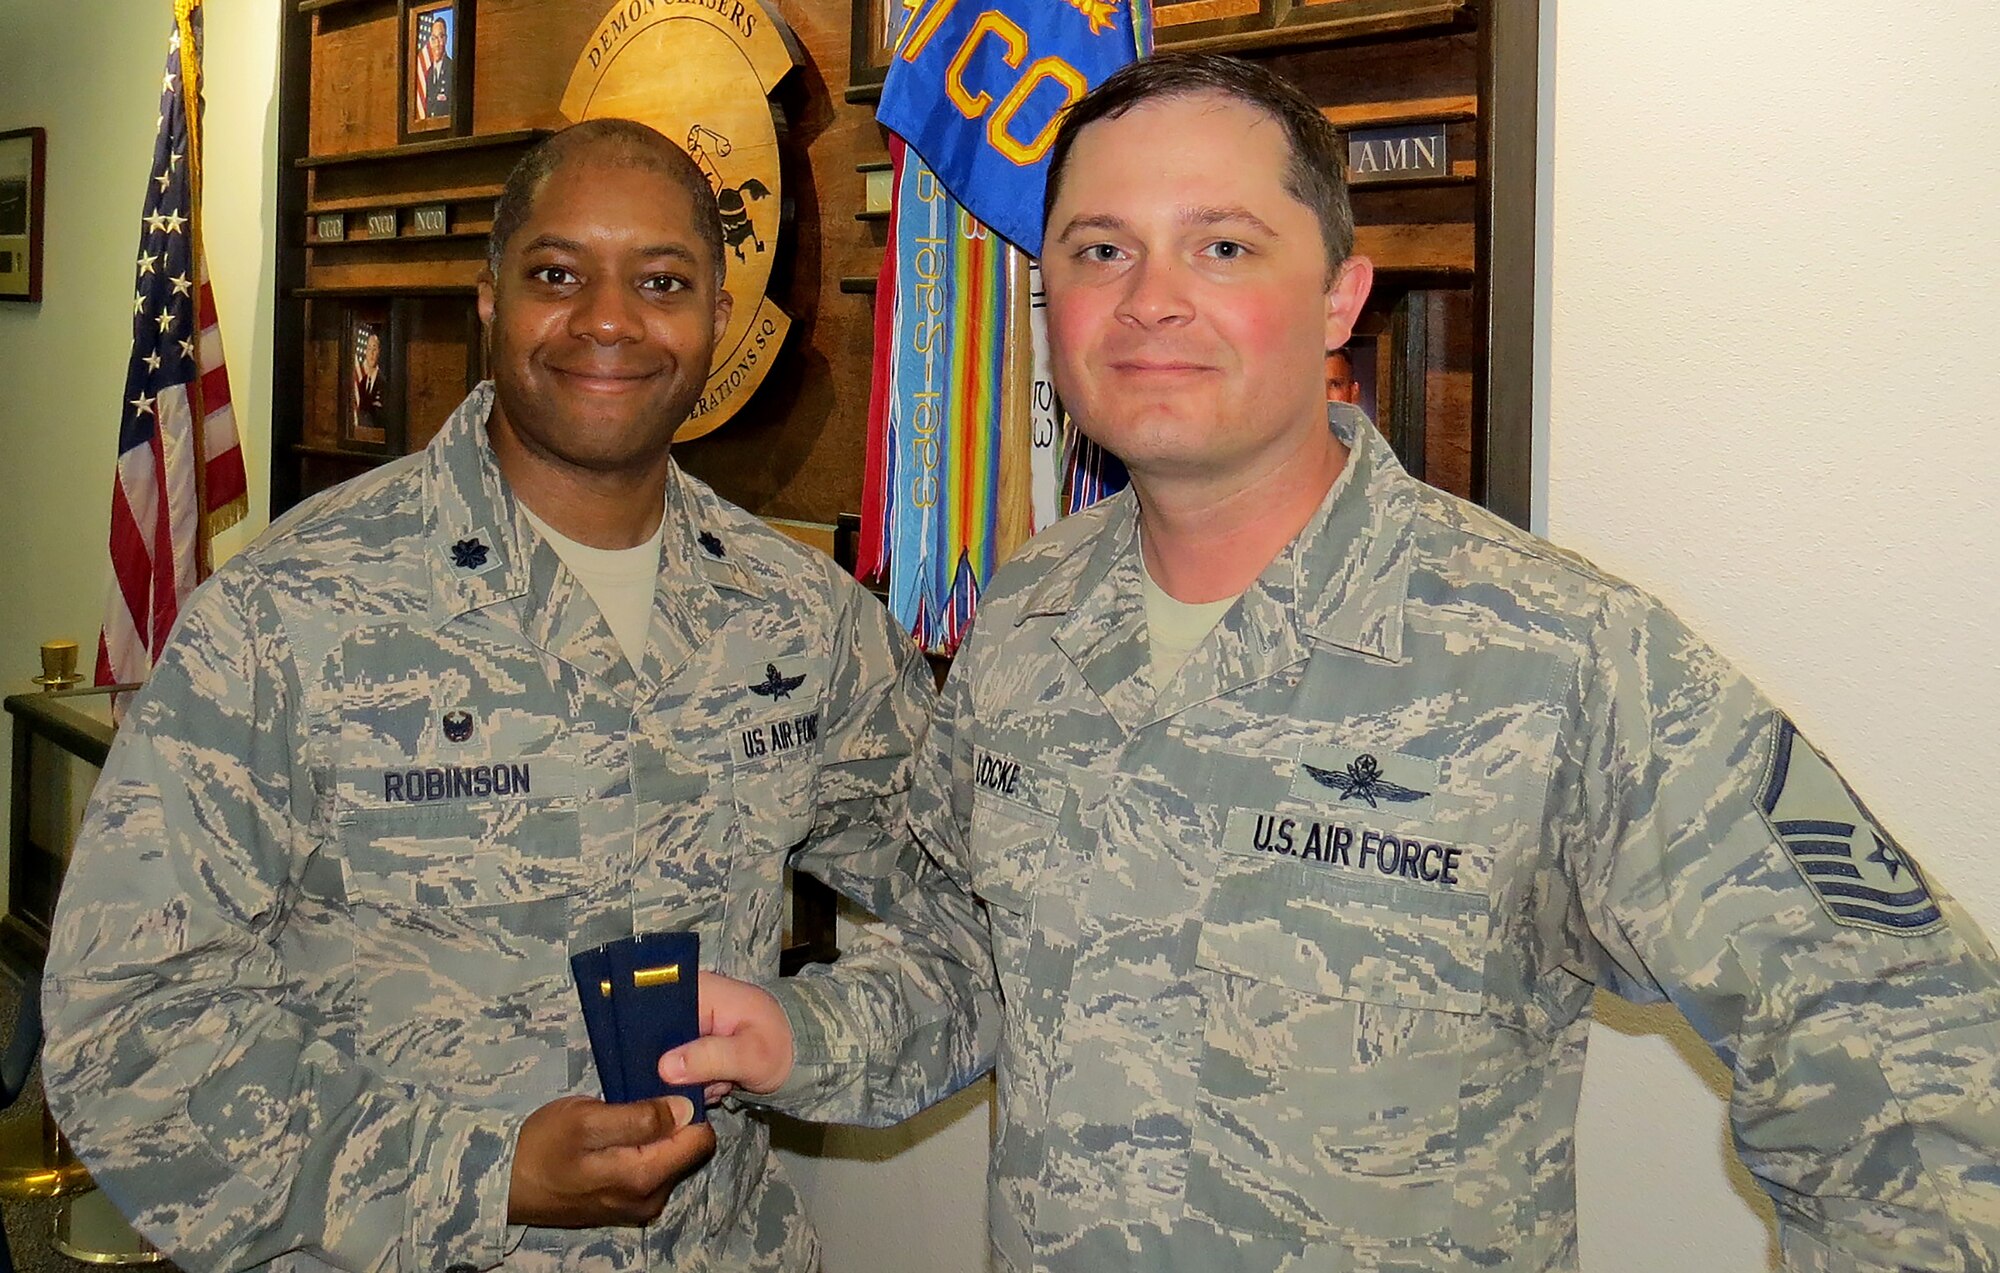 Lt. Col. Christopher Robinson, 91st Cyberspace Operations Squadron commander, hands second lieutenant ranks to Master Sgt. Micheal Locke, 91st COS operations superintendent, to celebrate his selection as a candidate for the newly authorized cyber direct appointment program. Upon successful completion of the program, Locke will commission as a second lieutenant. (Courtesy photo)